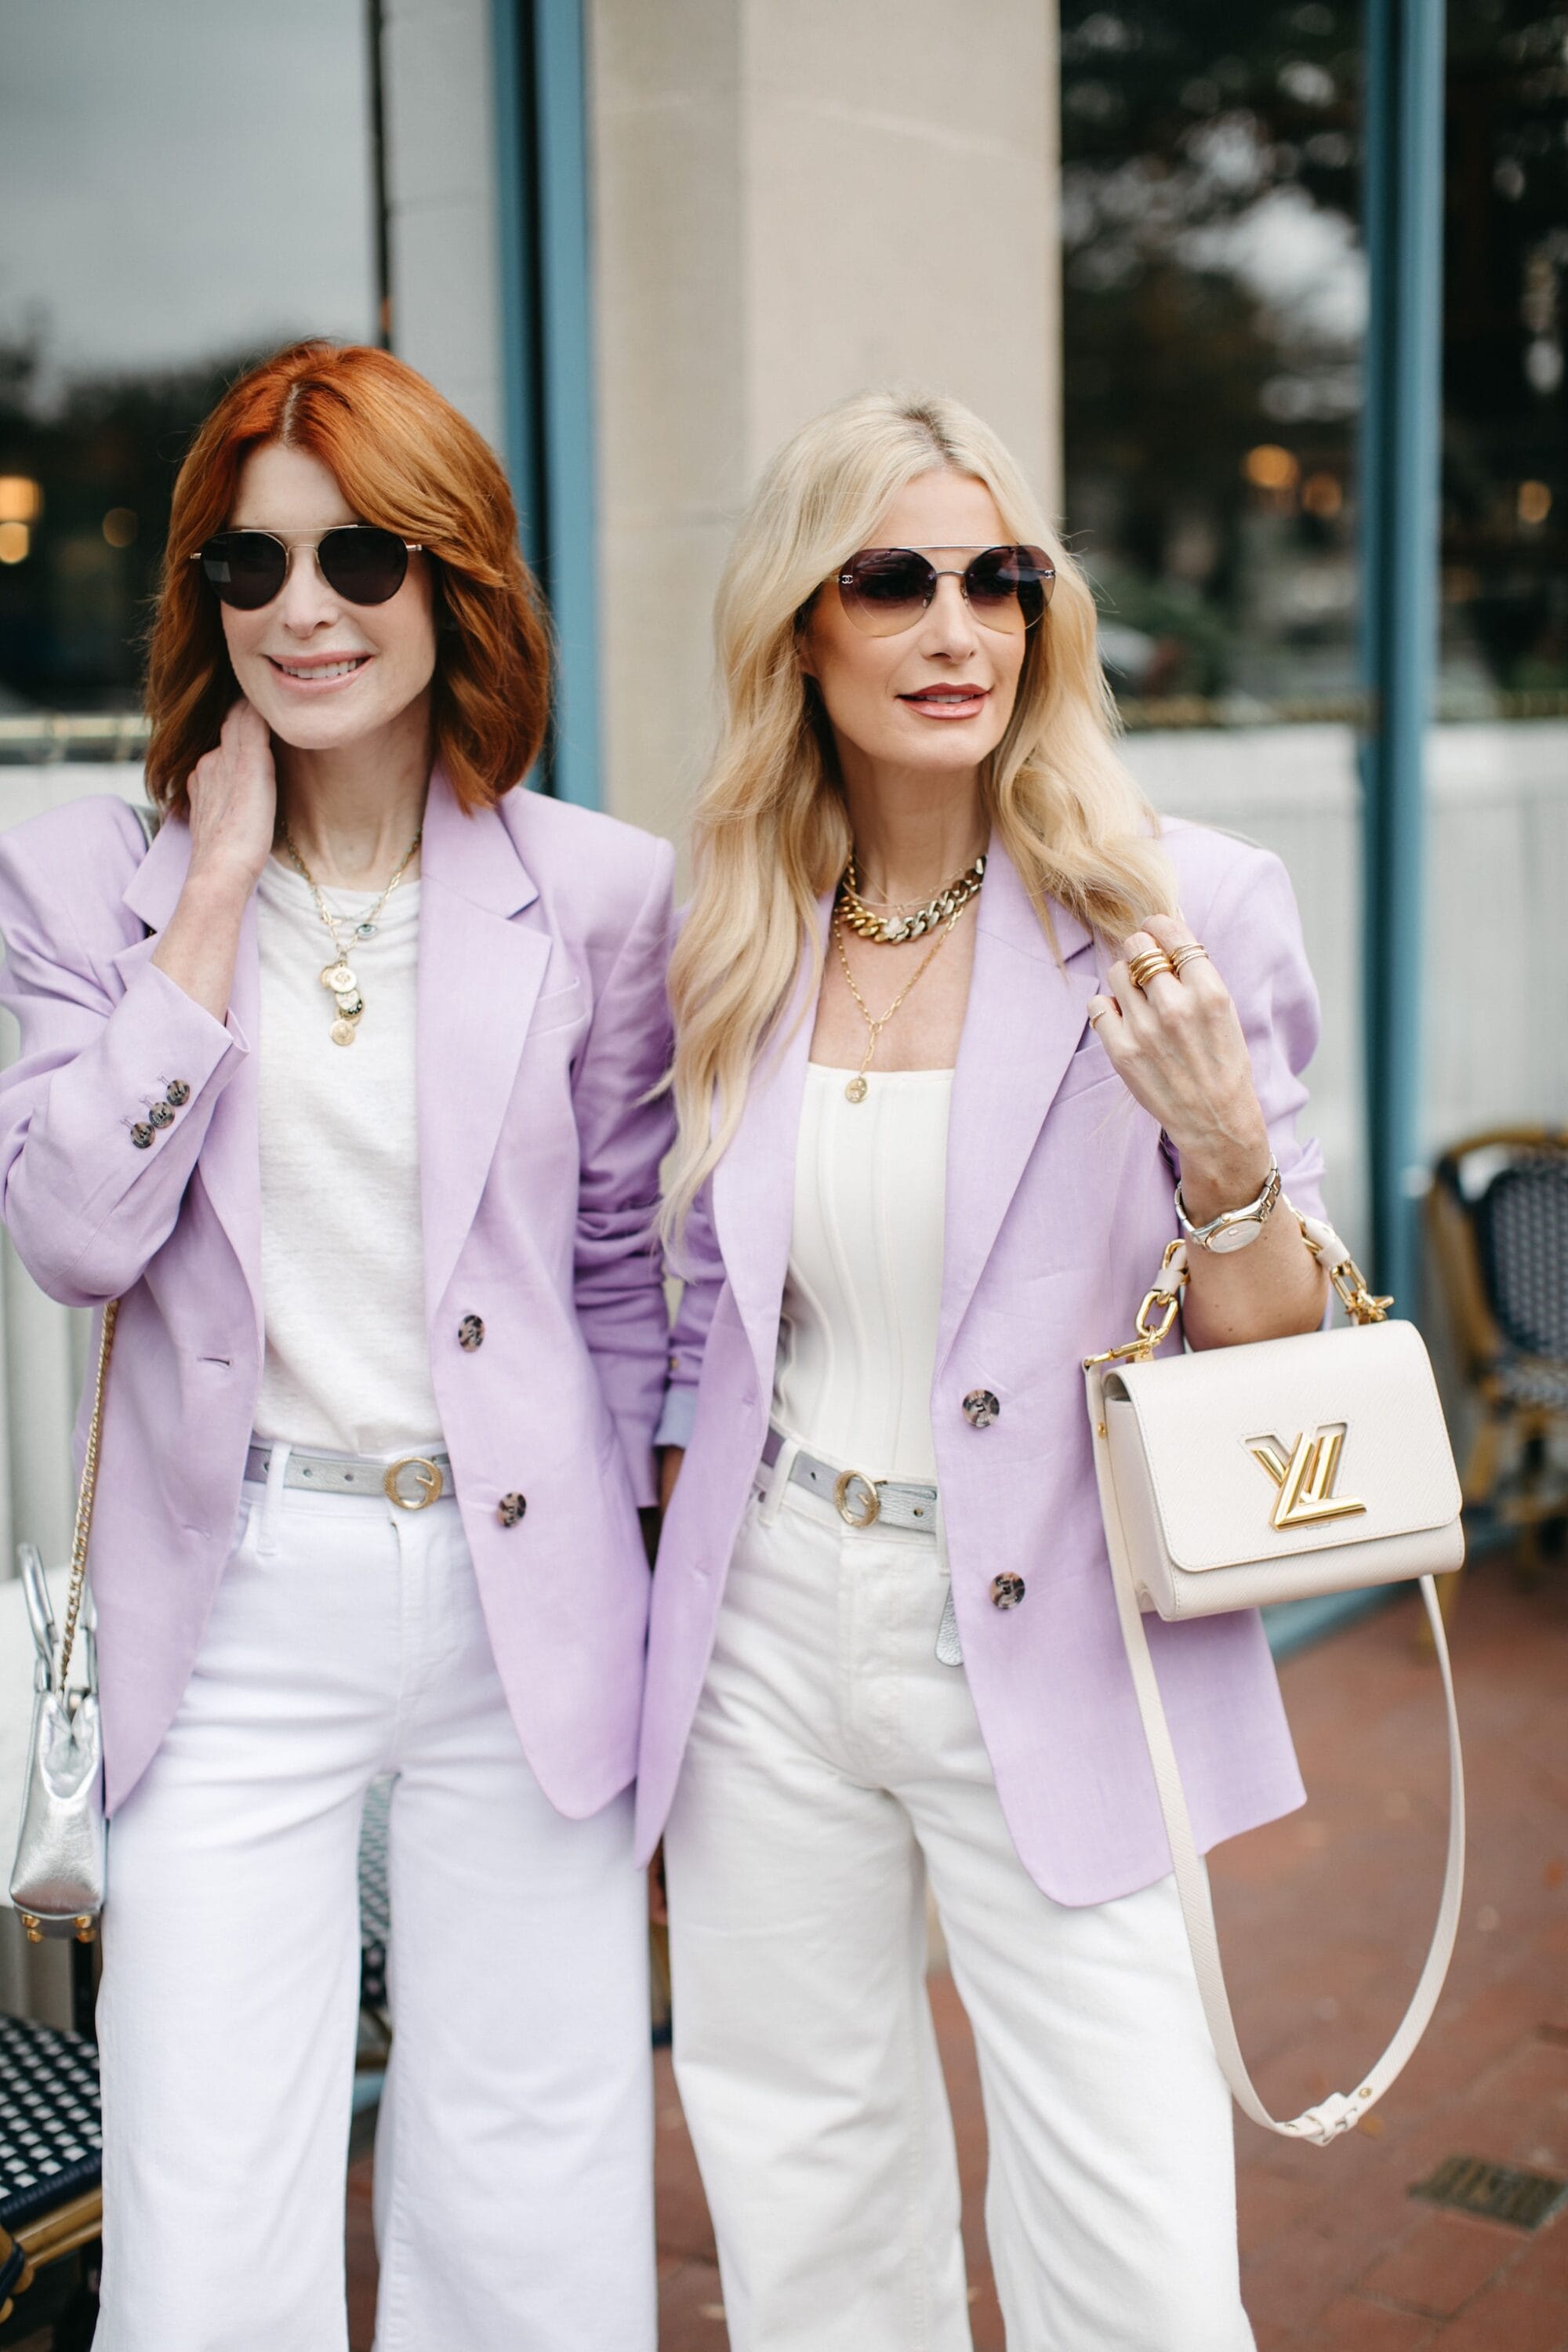 Over 40 fashion bloggers from Dallas wearing lavender blazers with white tops as one of 2 ways to style white denim.